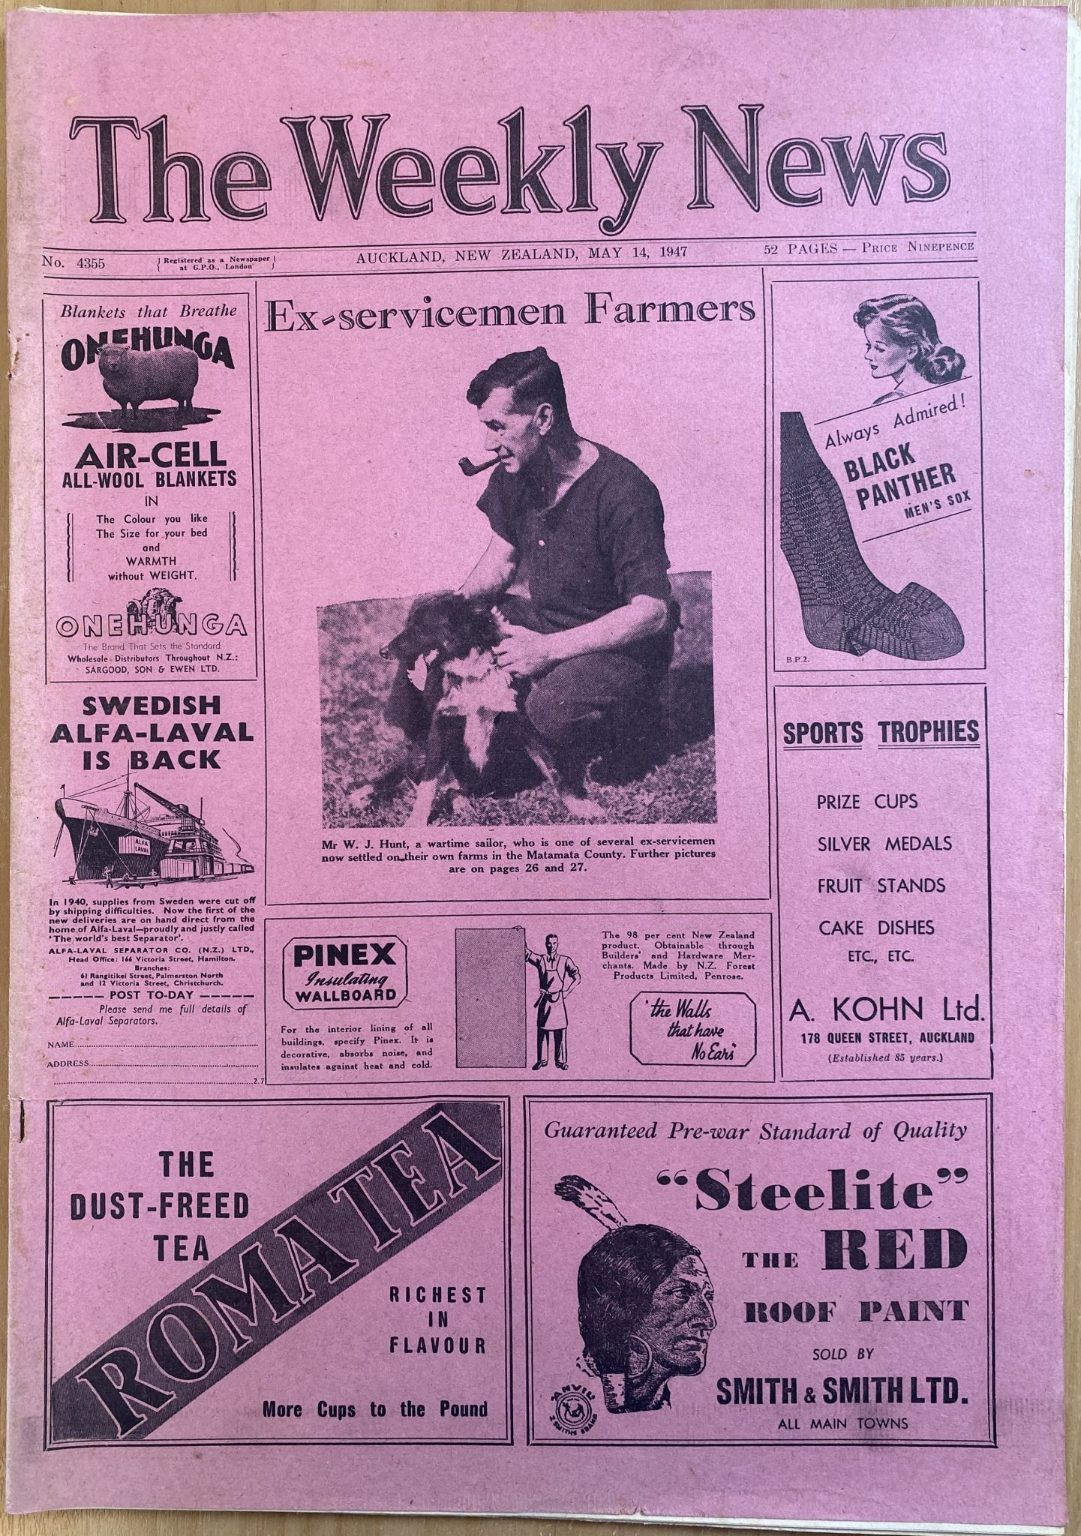 OLD NEWSPAPER: The Weekly News, No. 4355, 14 May 1947